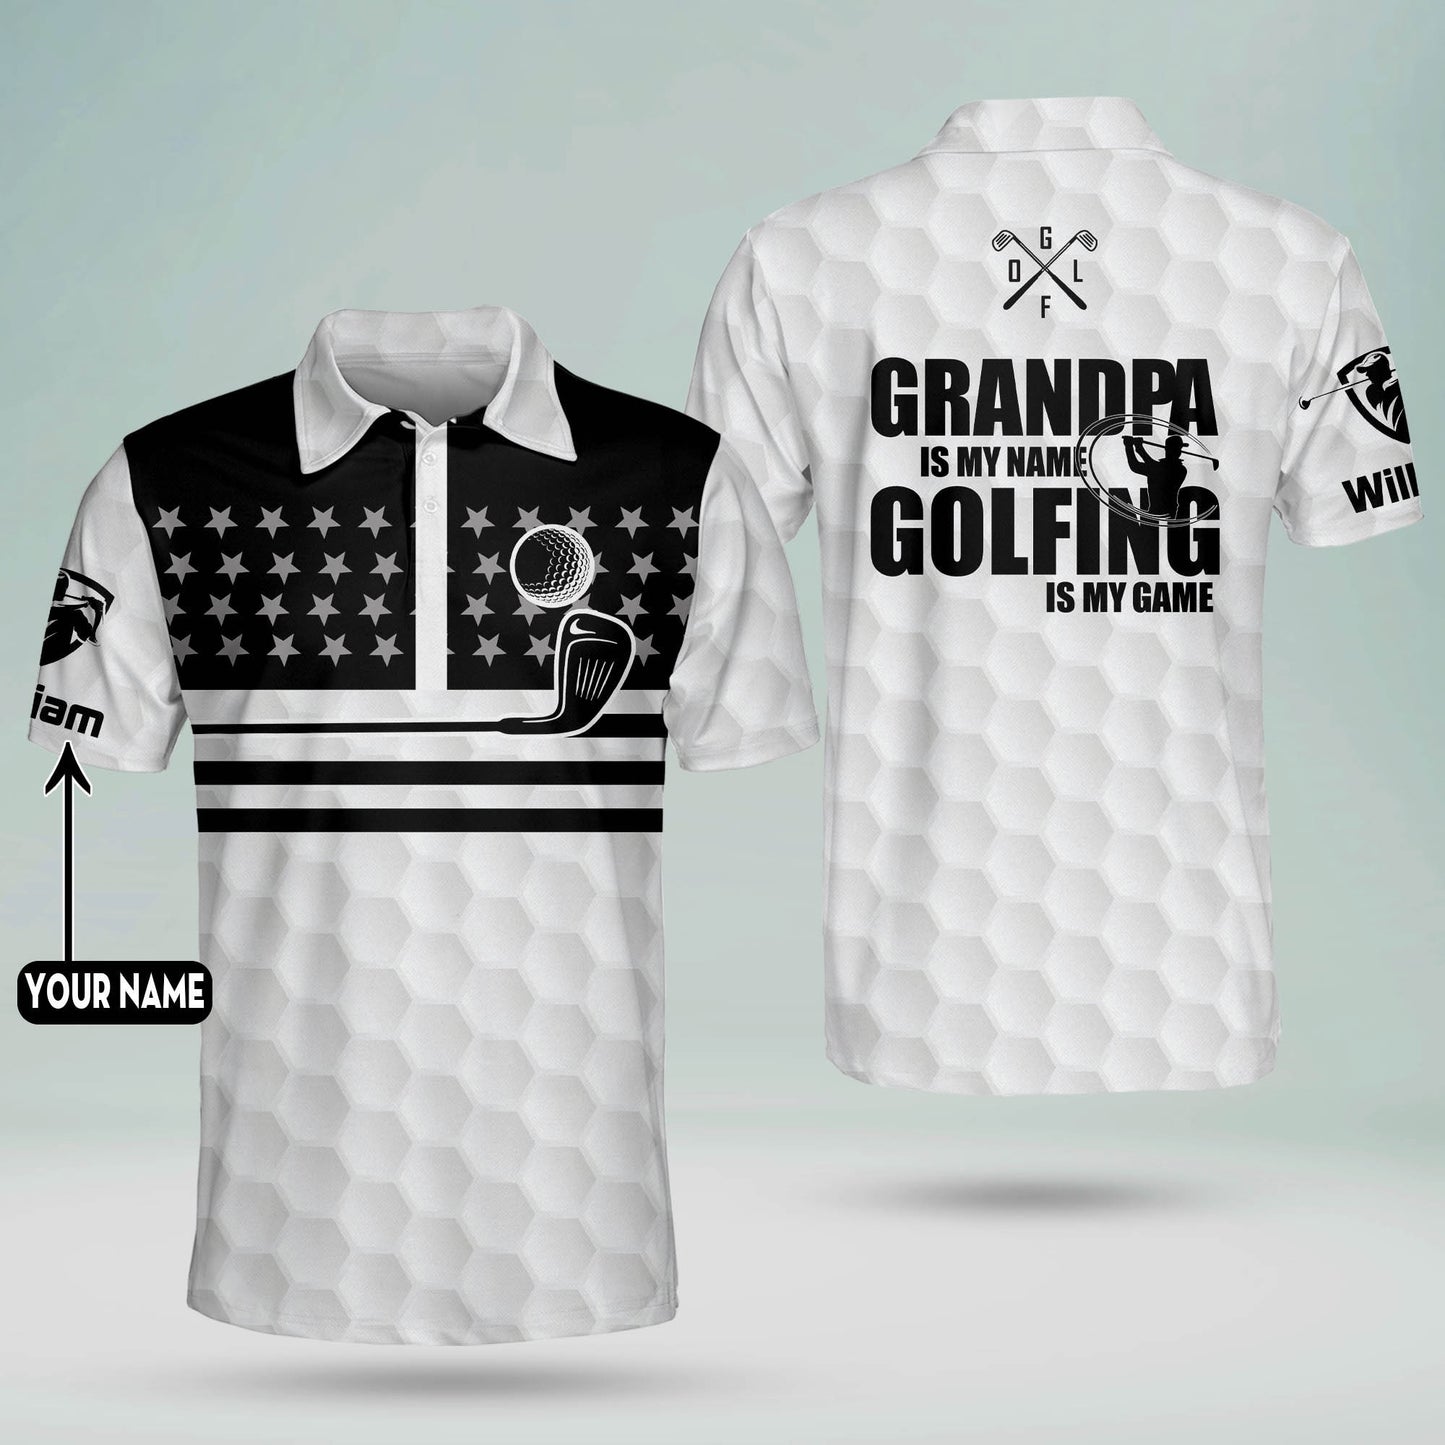 Grandpa is My Name Golfing is My Game Golf Polo Shirt GM0259